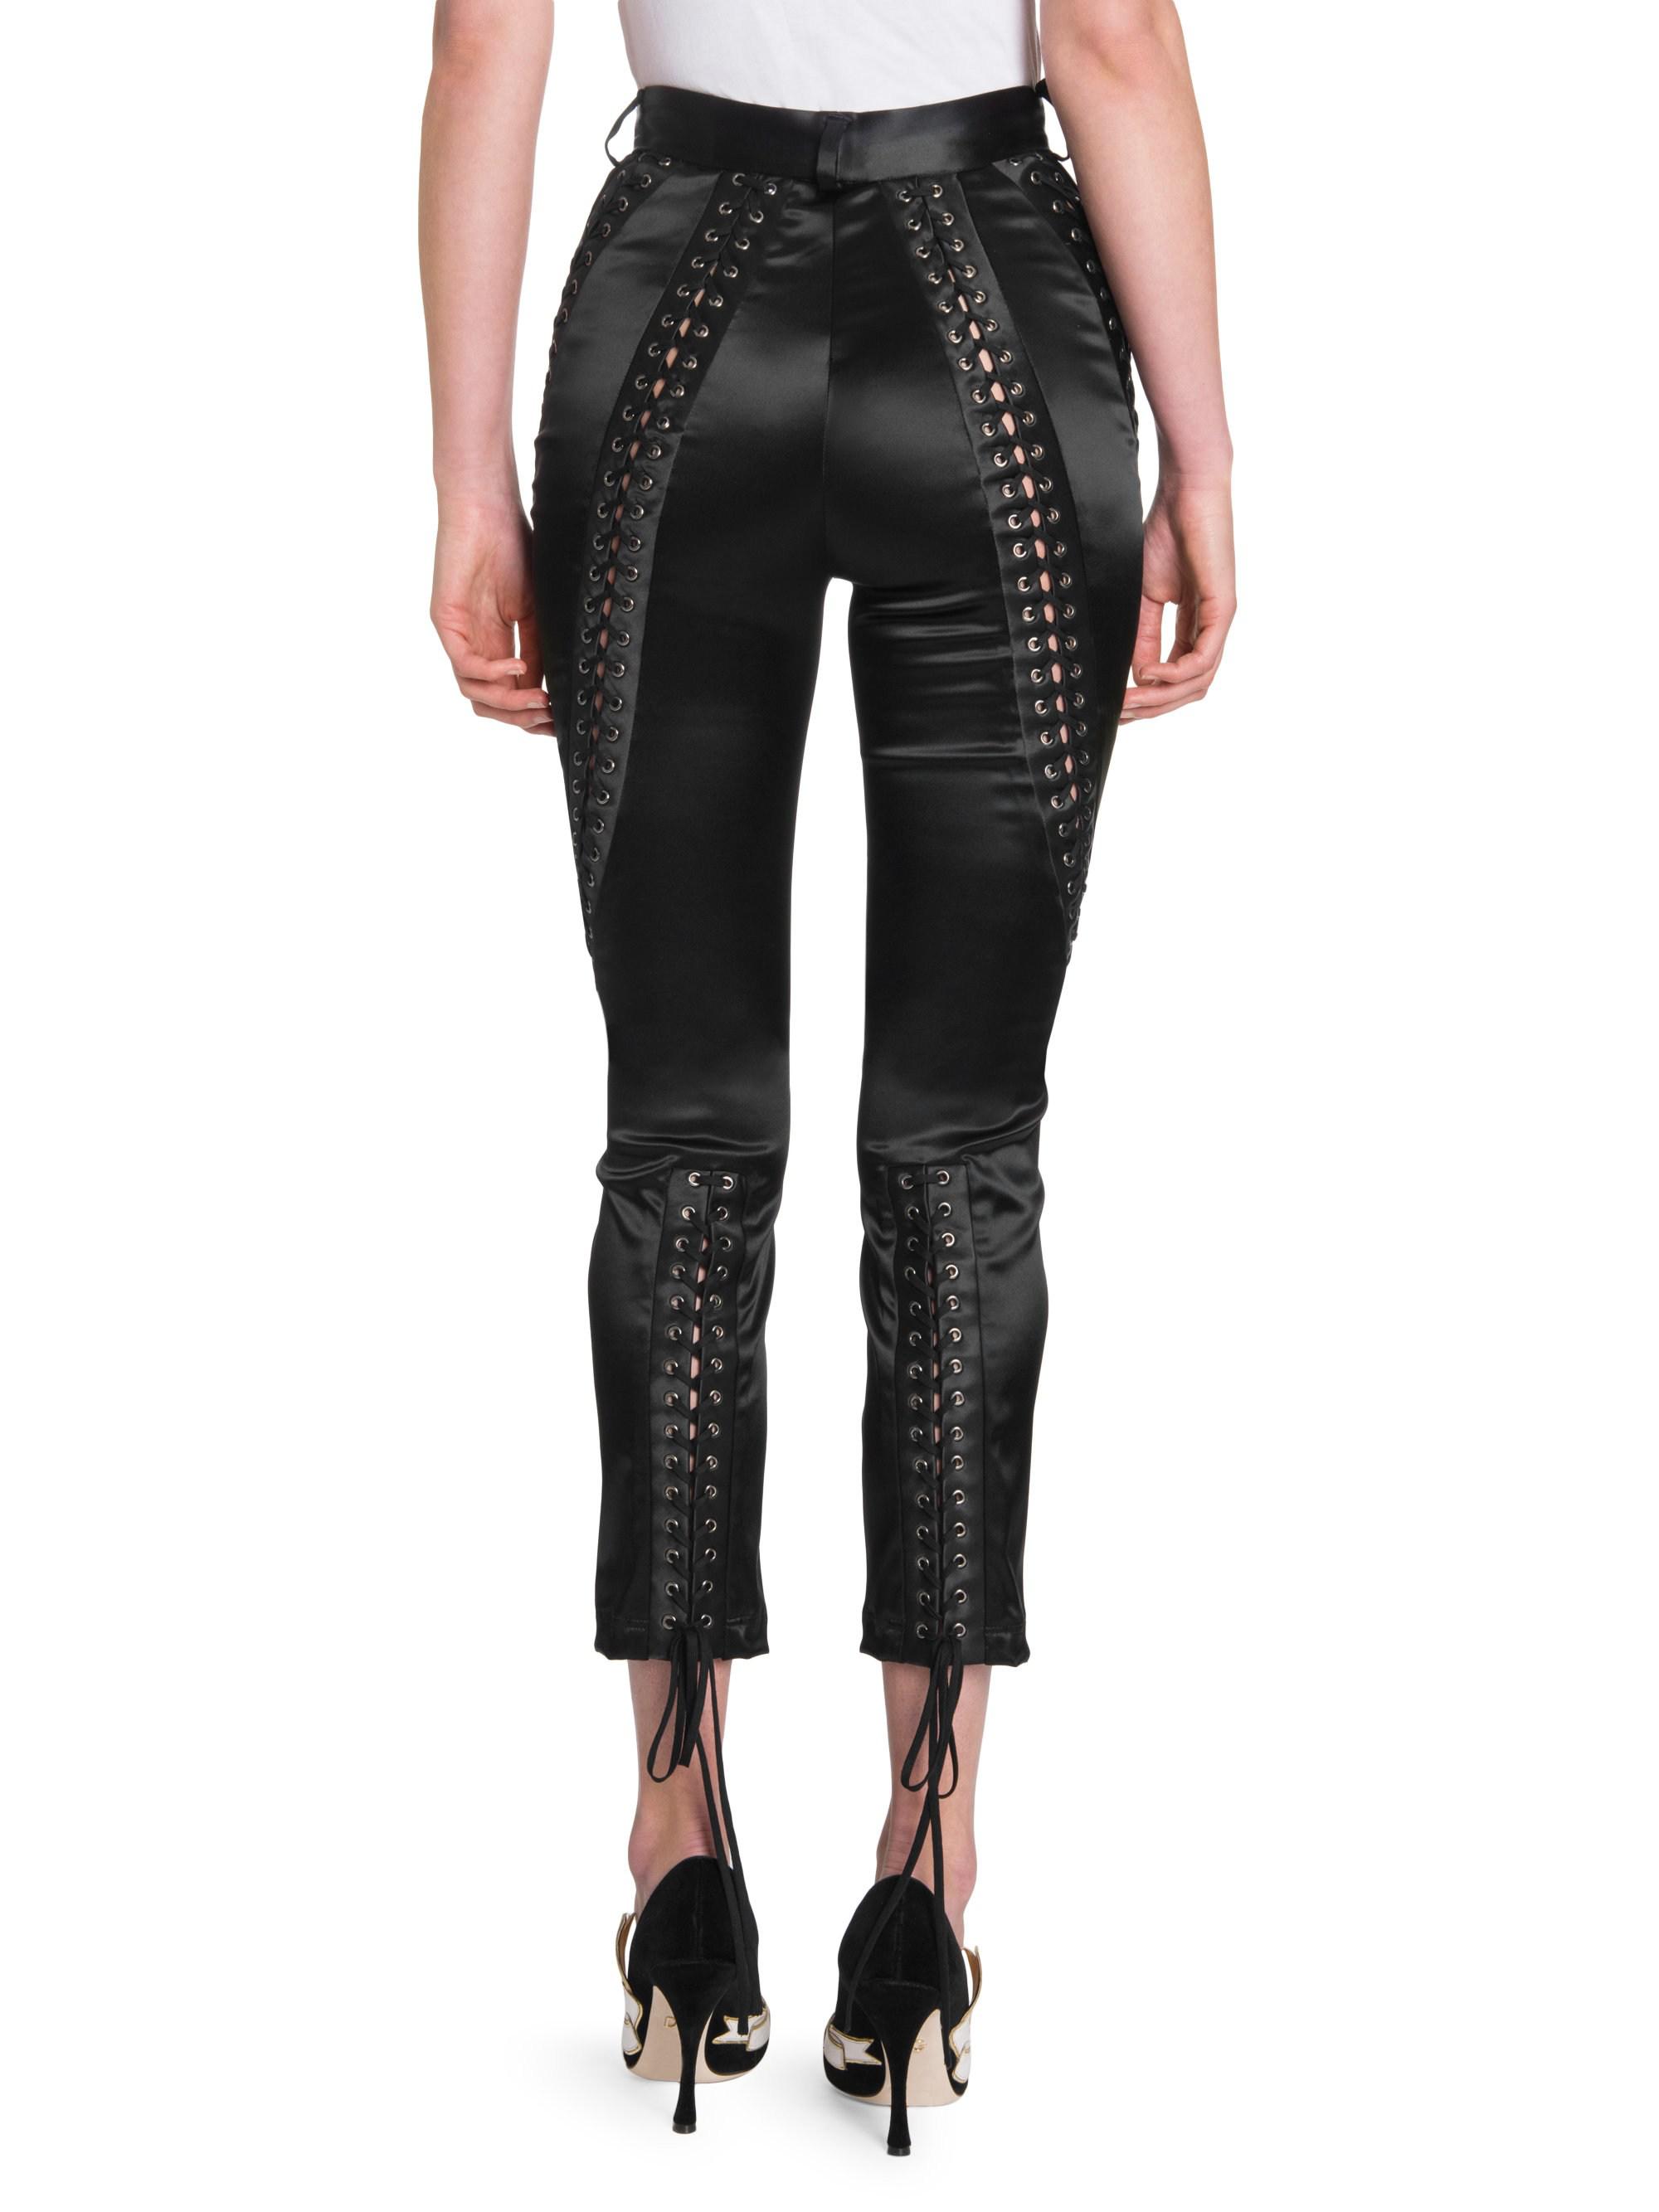 Dolce & Gabbana Satin Lace-up Pants in Black | Lyst